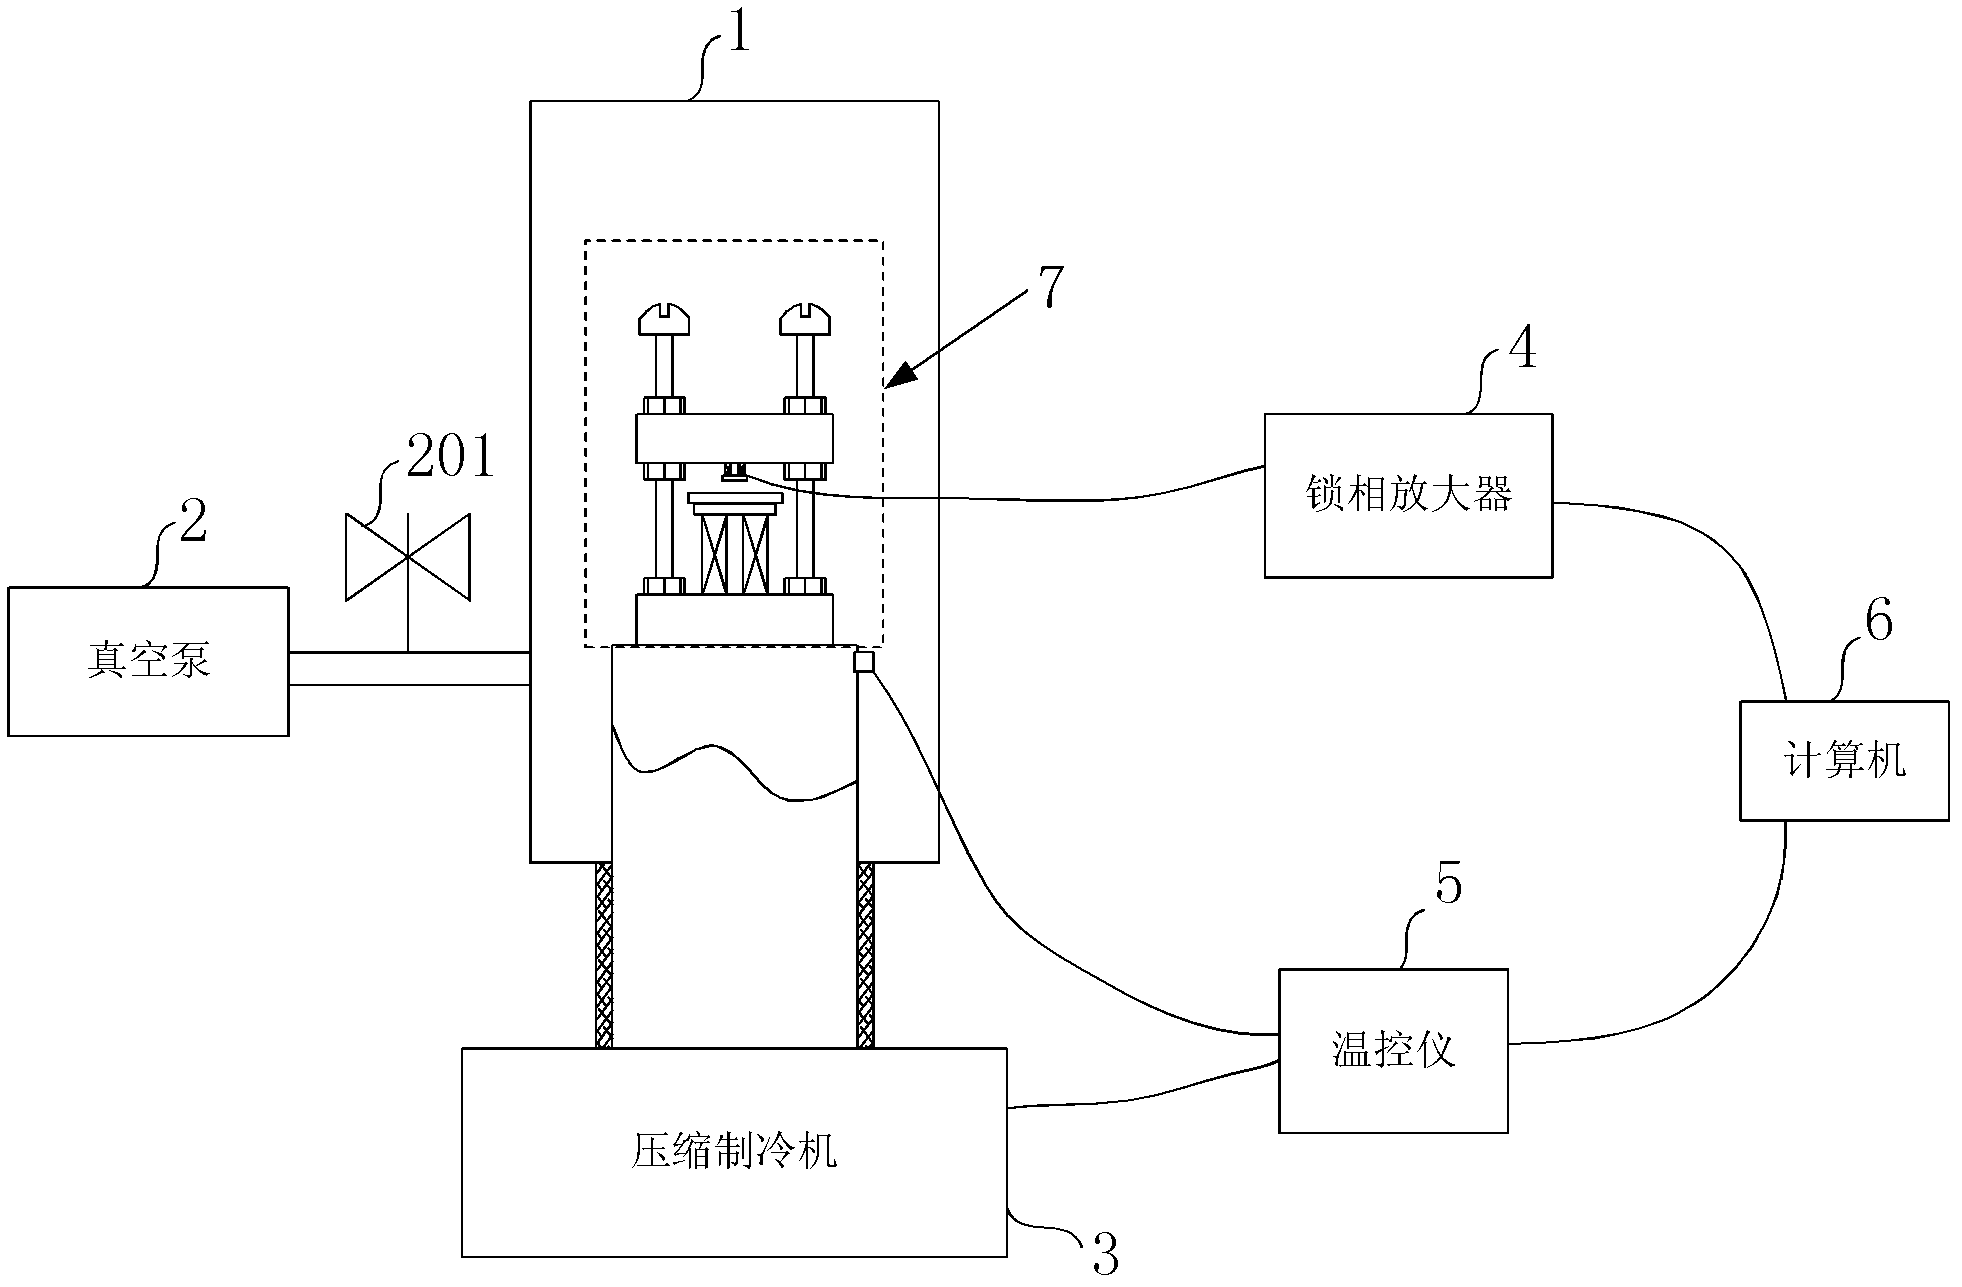 Measuring device and measuring method of superconductive AC magnetic susceptibility